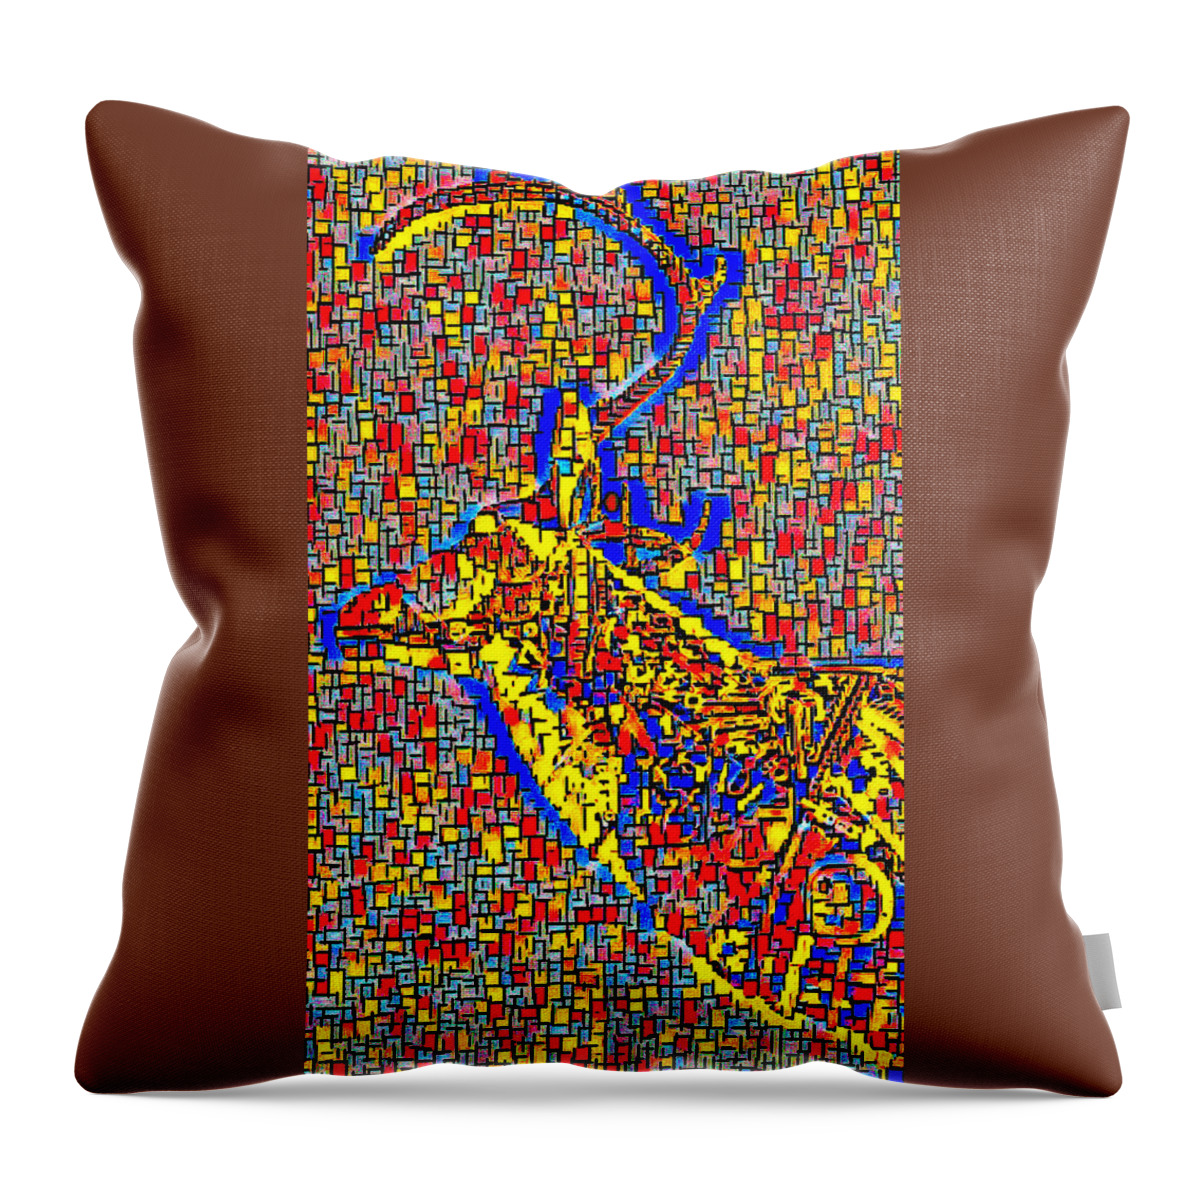 Deer Throw Pillow featuring the digital art Dear Impressions by Ally White